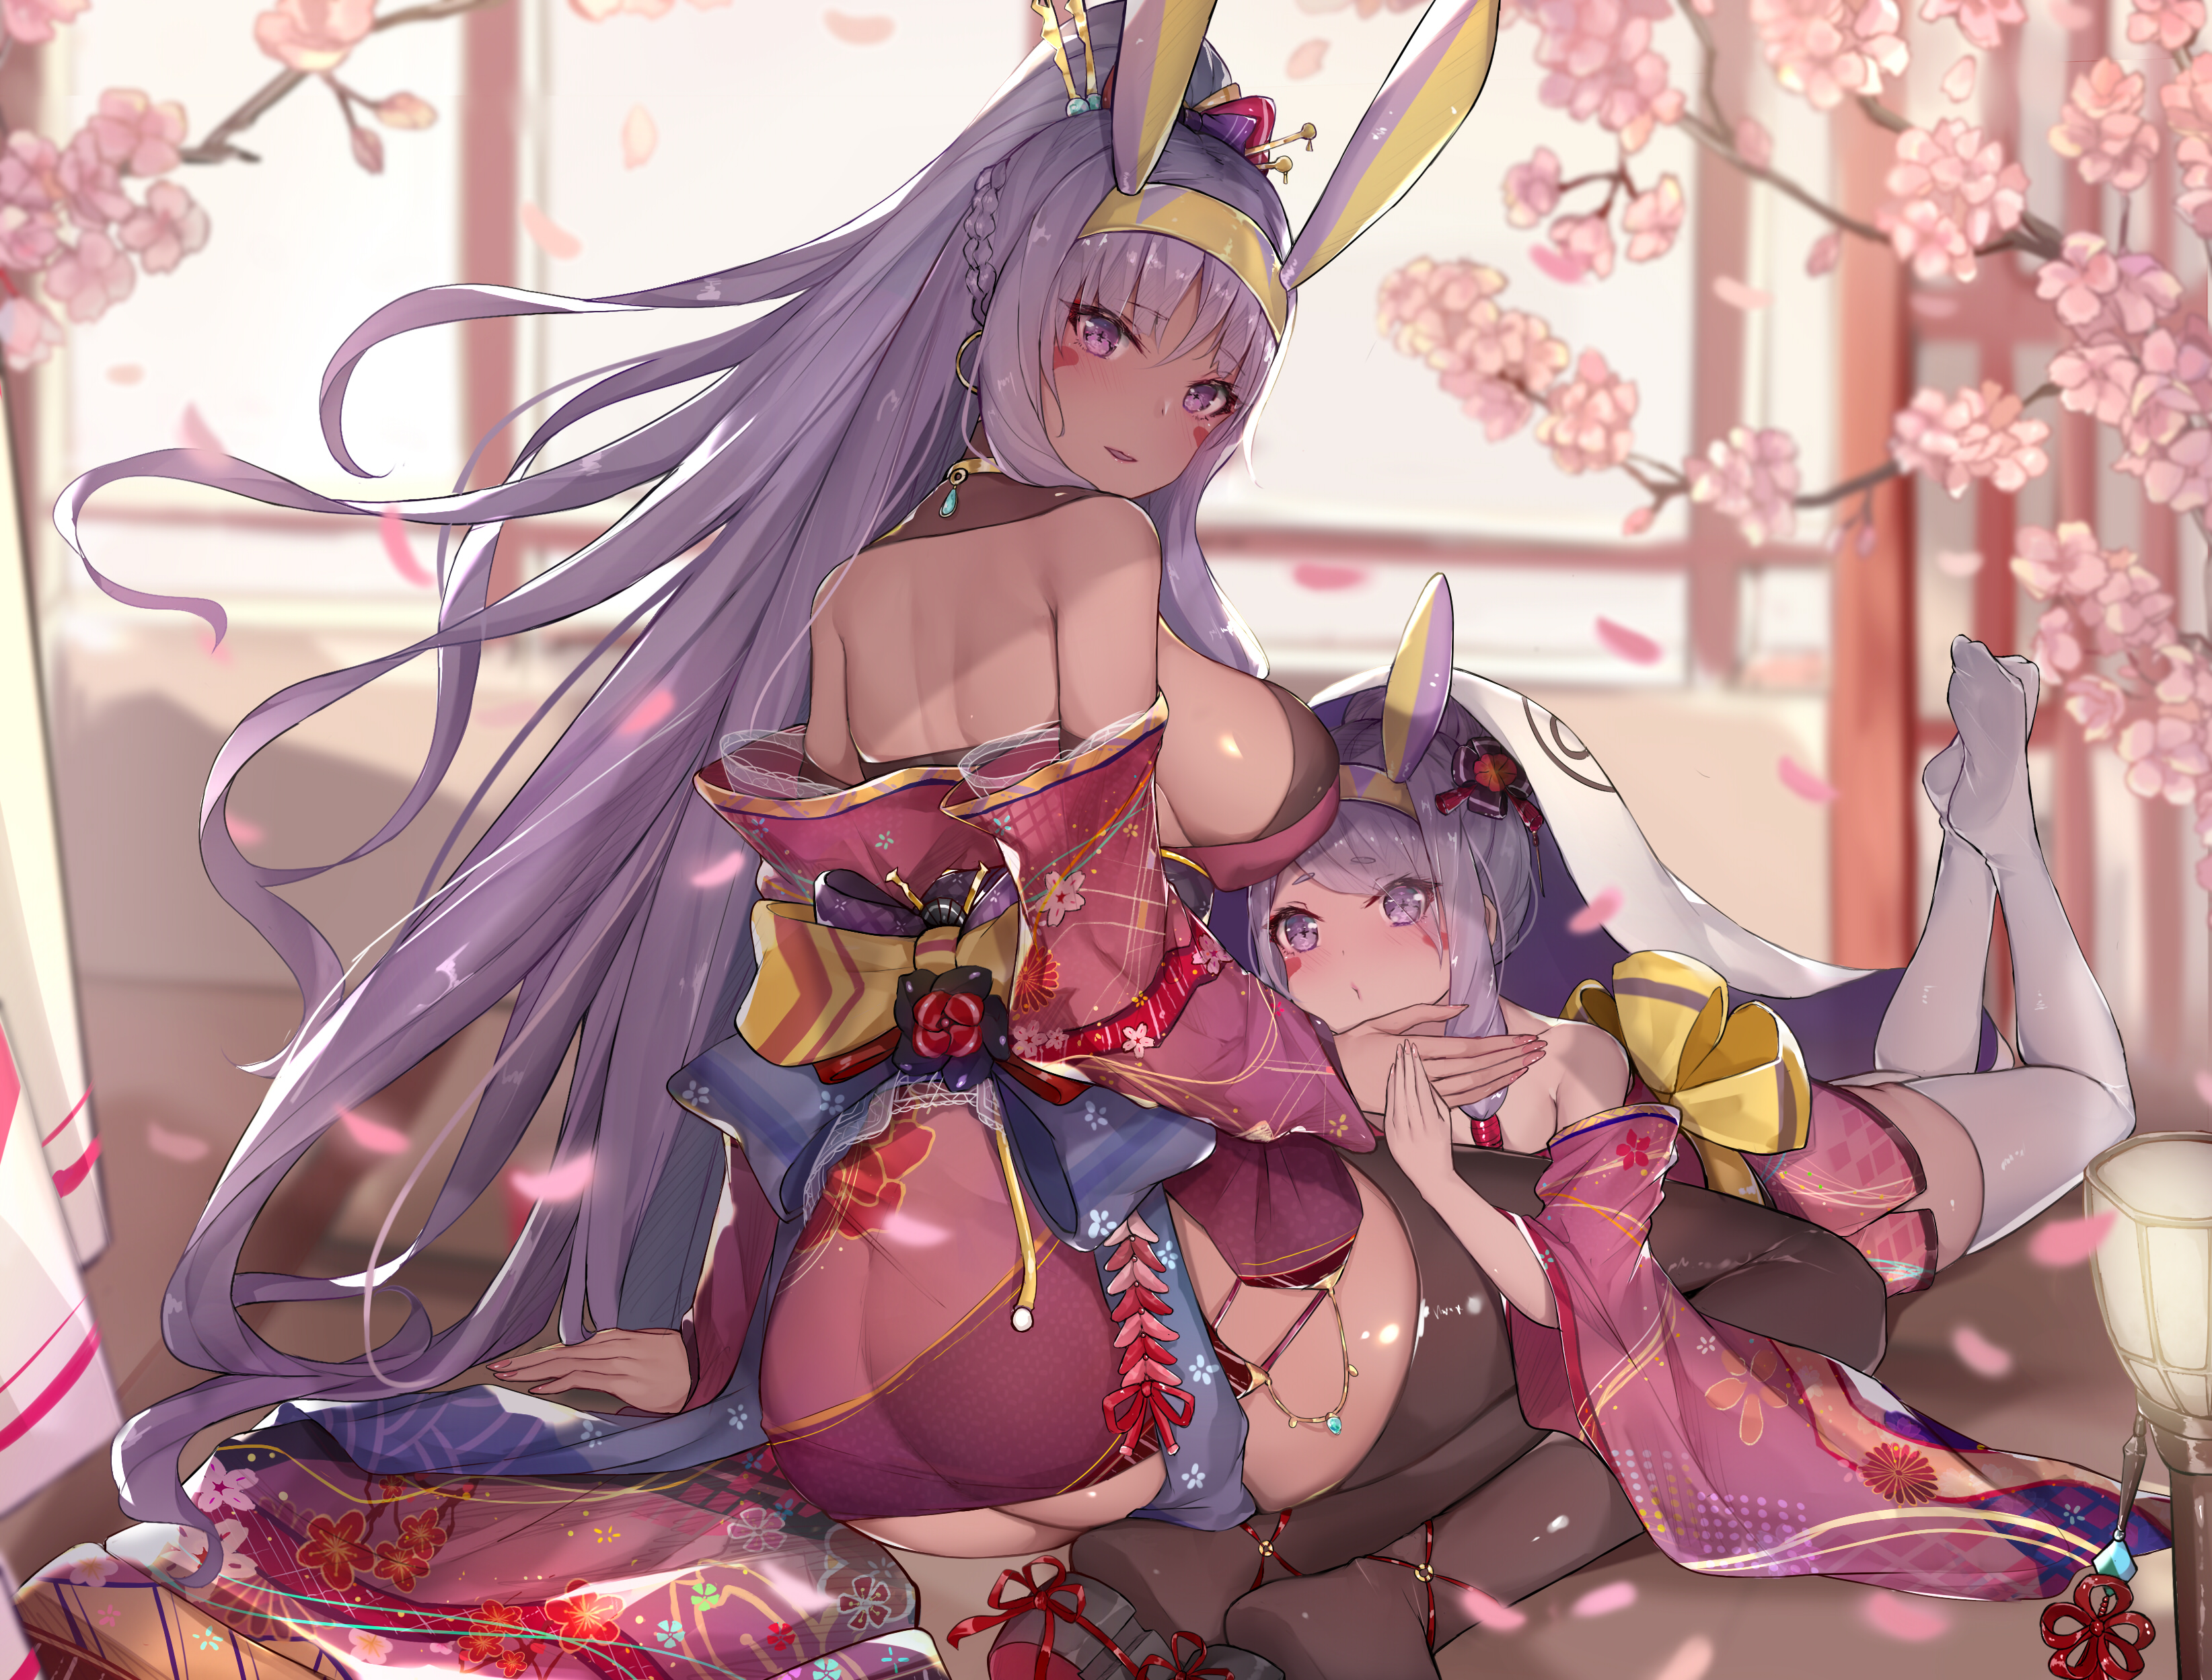 Anime 3288x2497 sherryQQ Fate/Grand Order Nitocris (Fate/Grand Order) anime anime girls long hair purple hair ass legs sideboob cherry blossom loli Japanese clothes Fate series